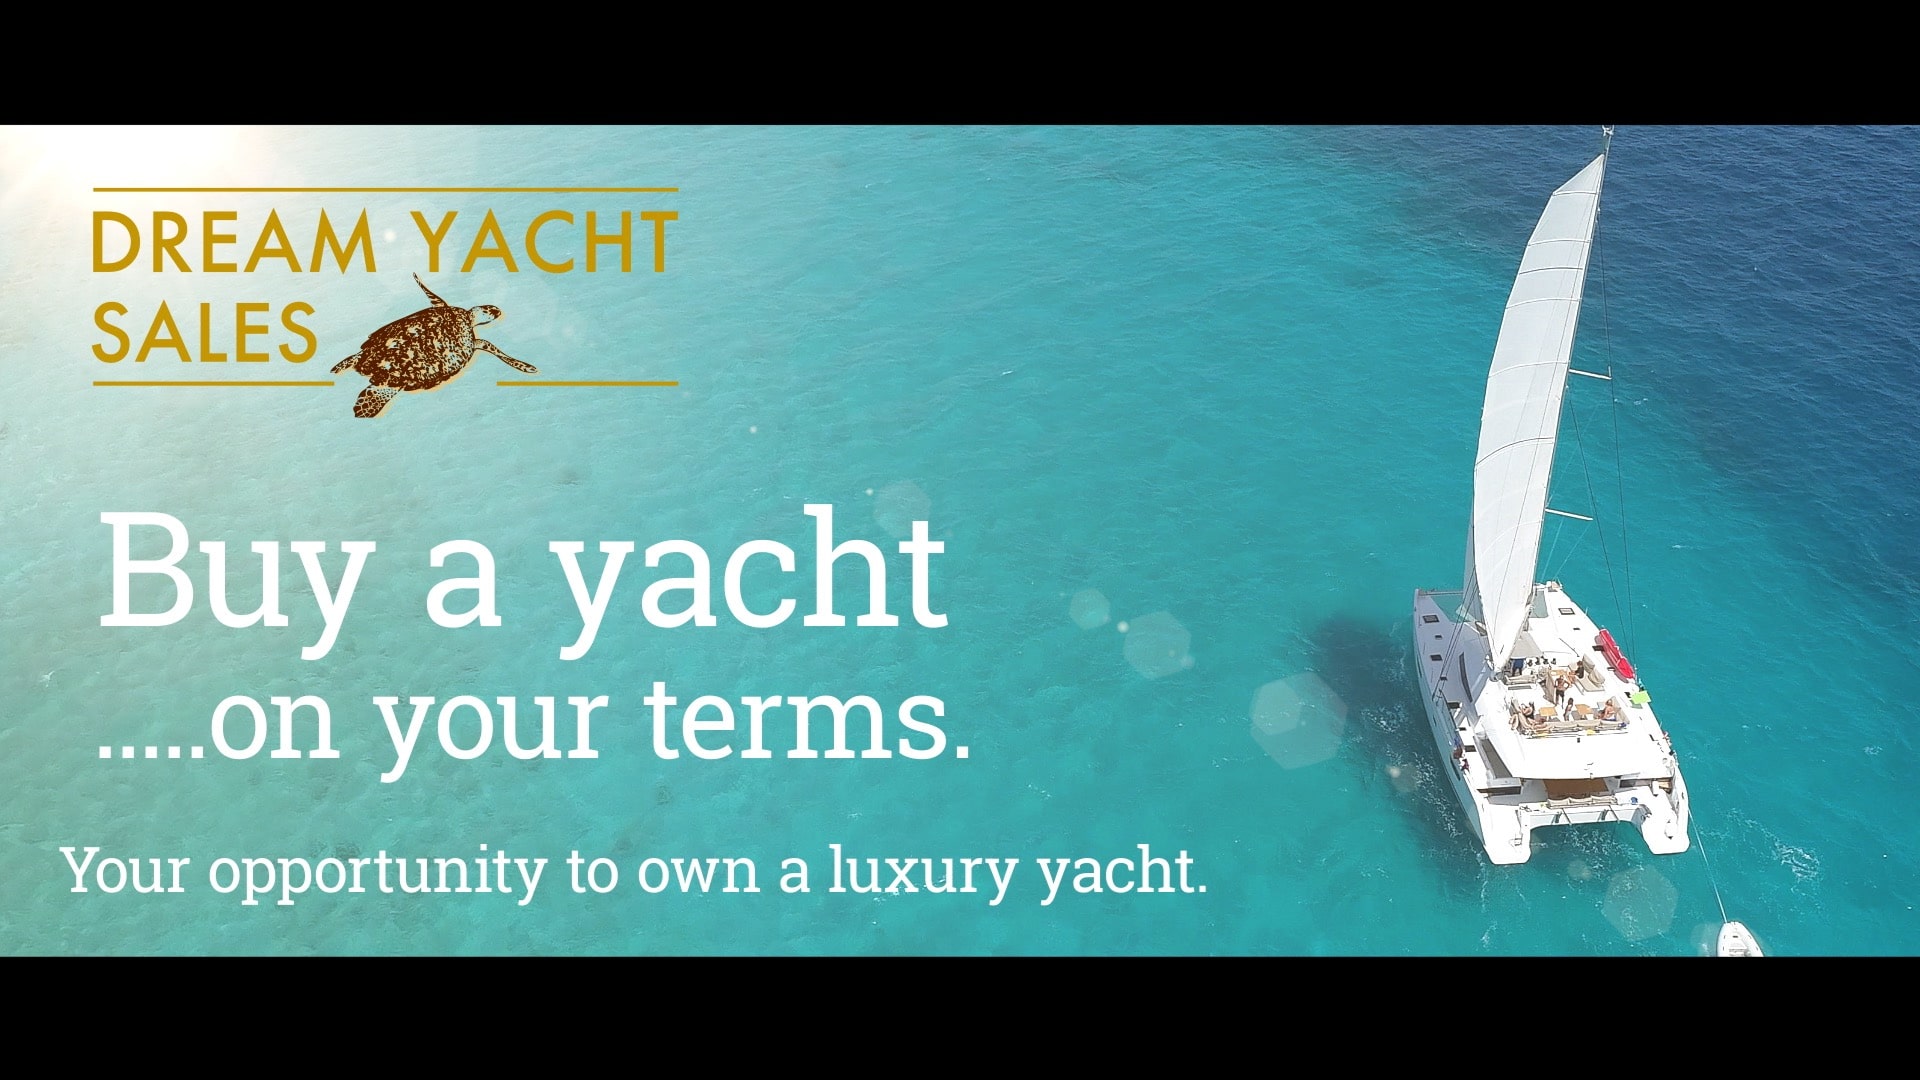 Yacht Sales Video for Dreams